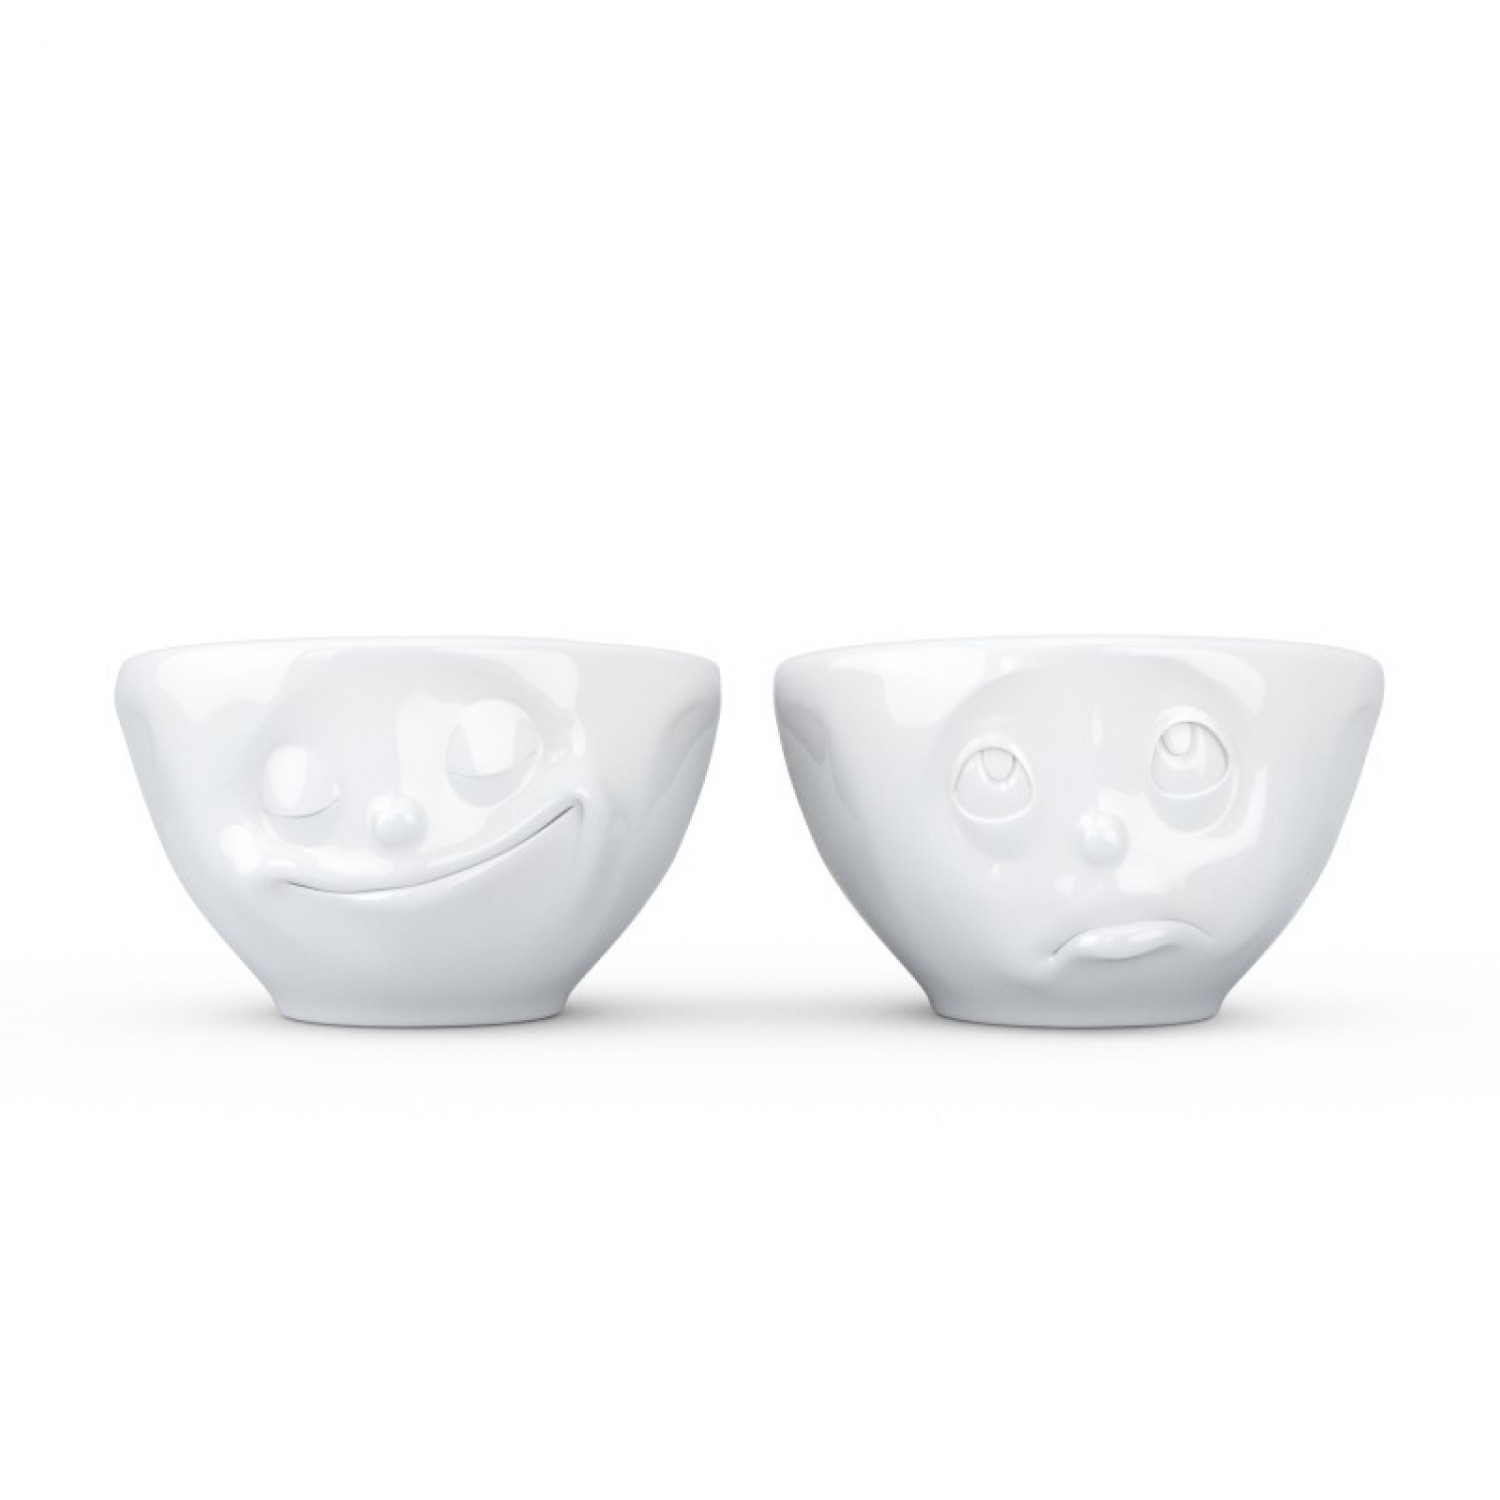 Medium Bowls “Happy & Oh Please” 2 pieces | 58 Products